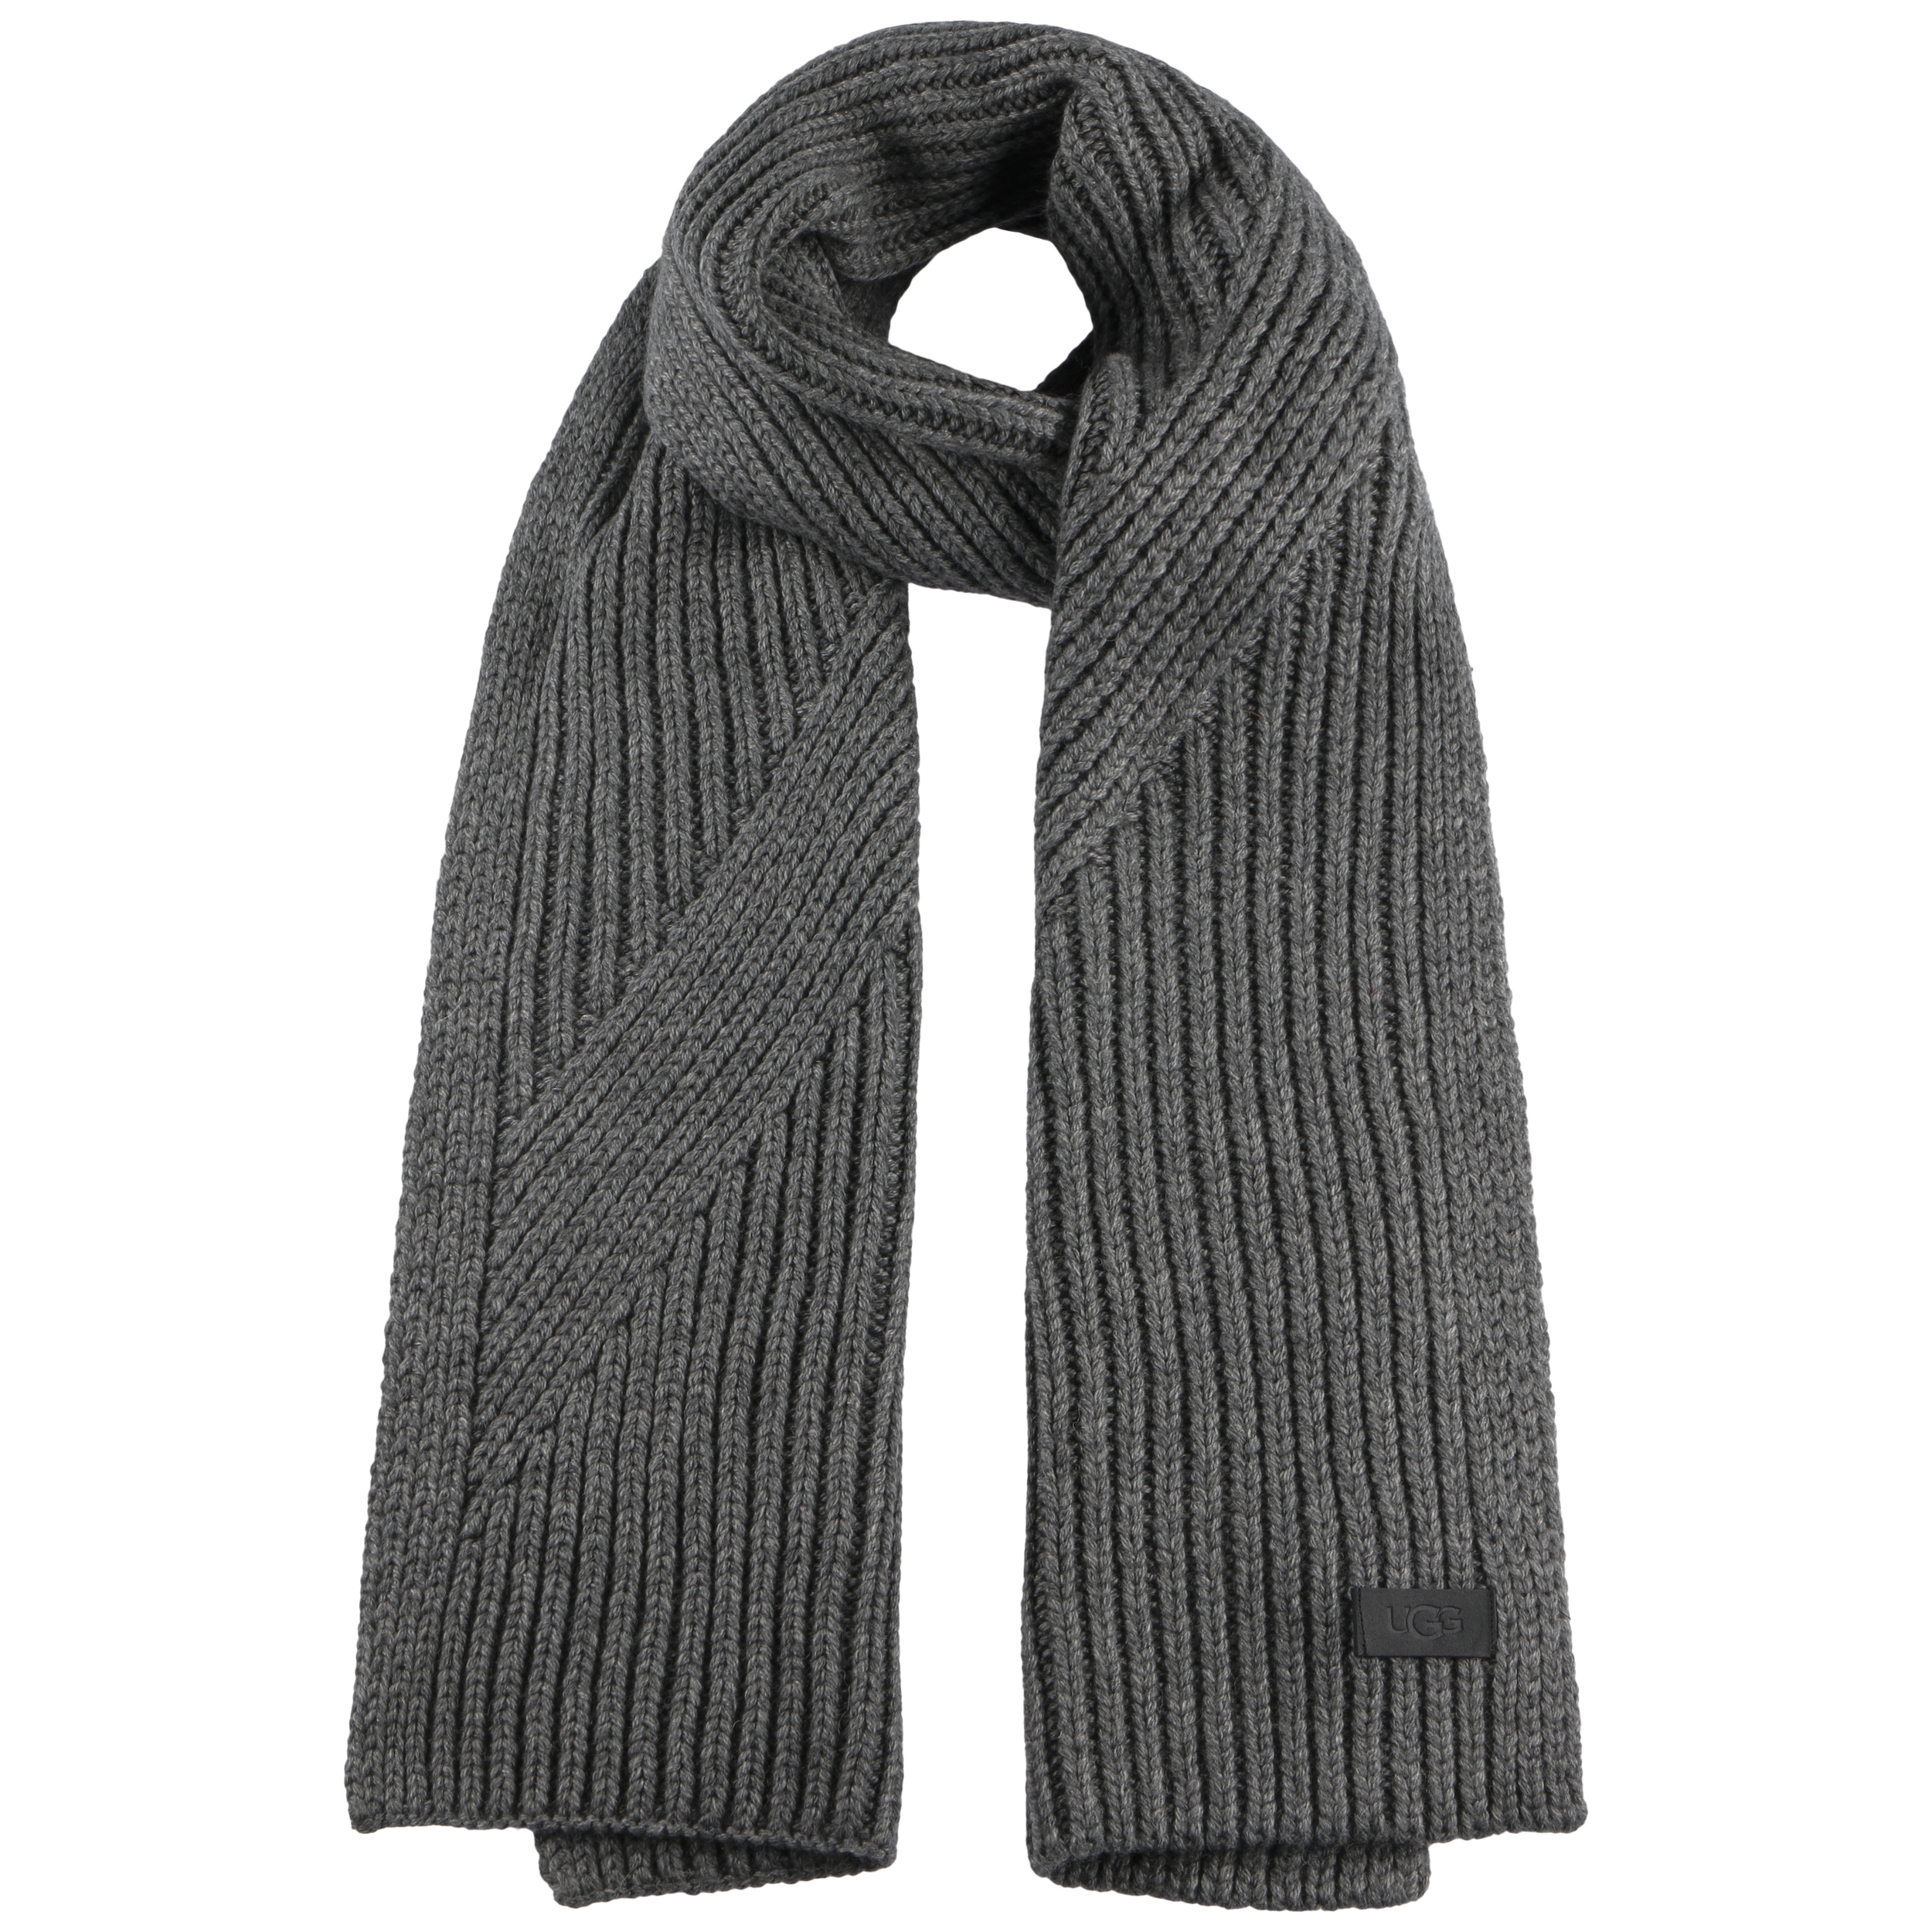 Ribbed Knit Scarf by UGG - 83,95